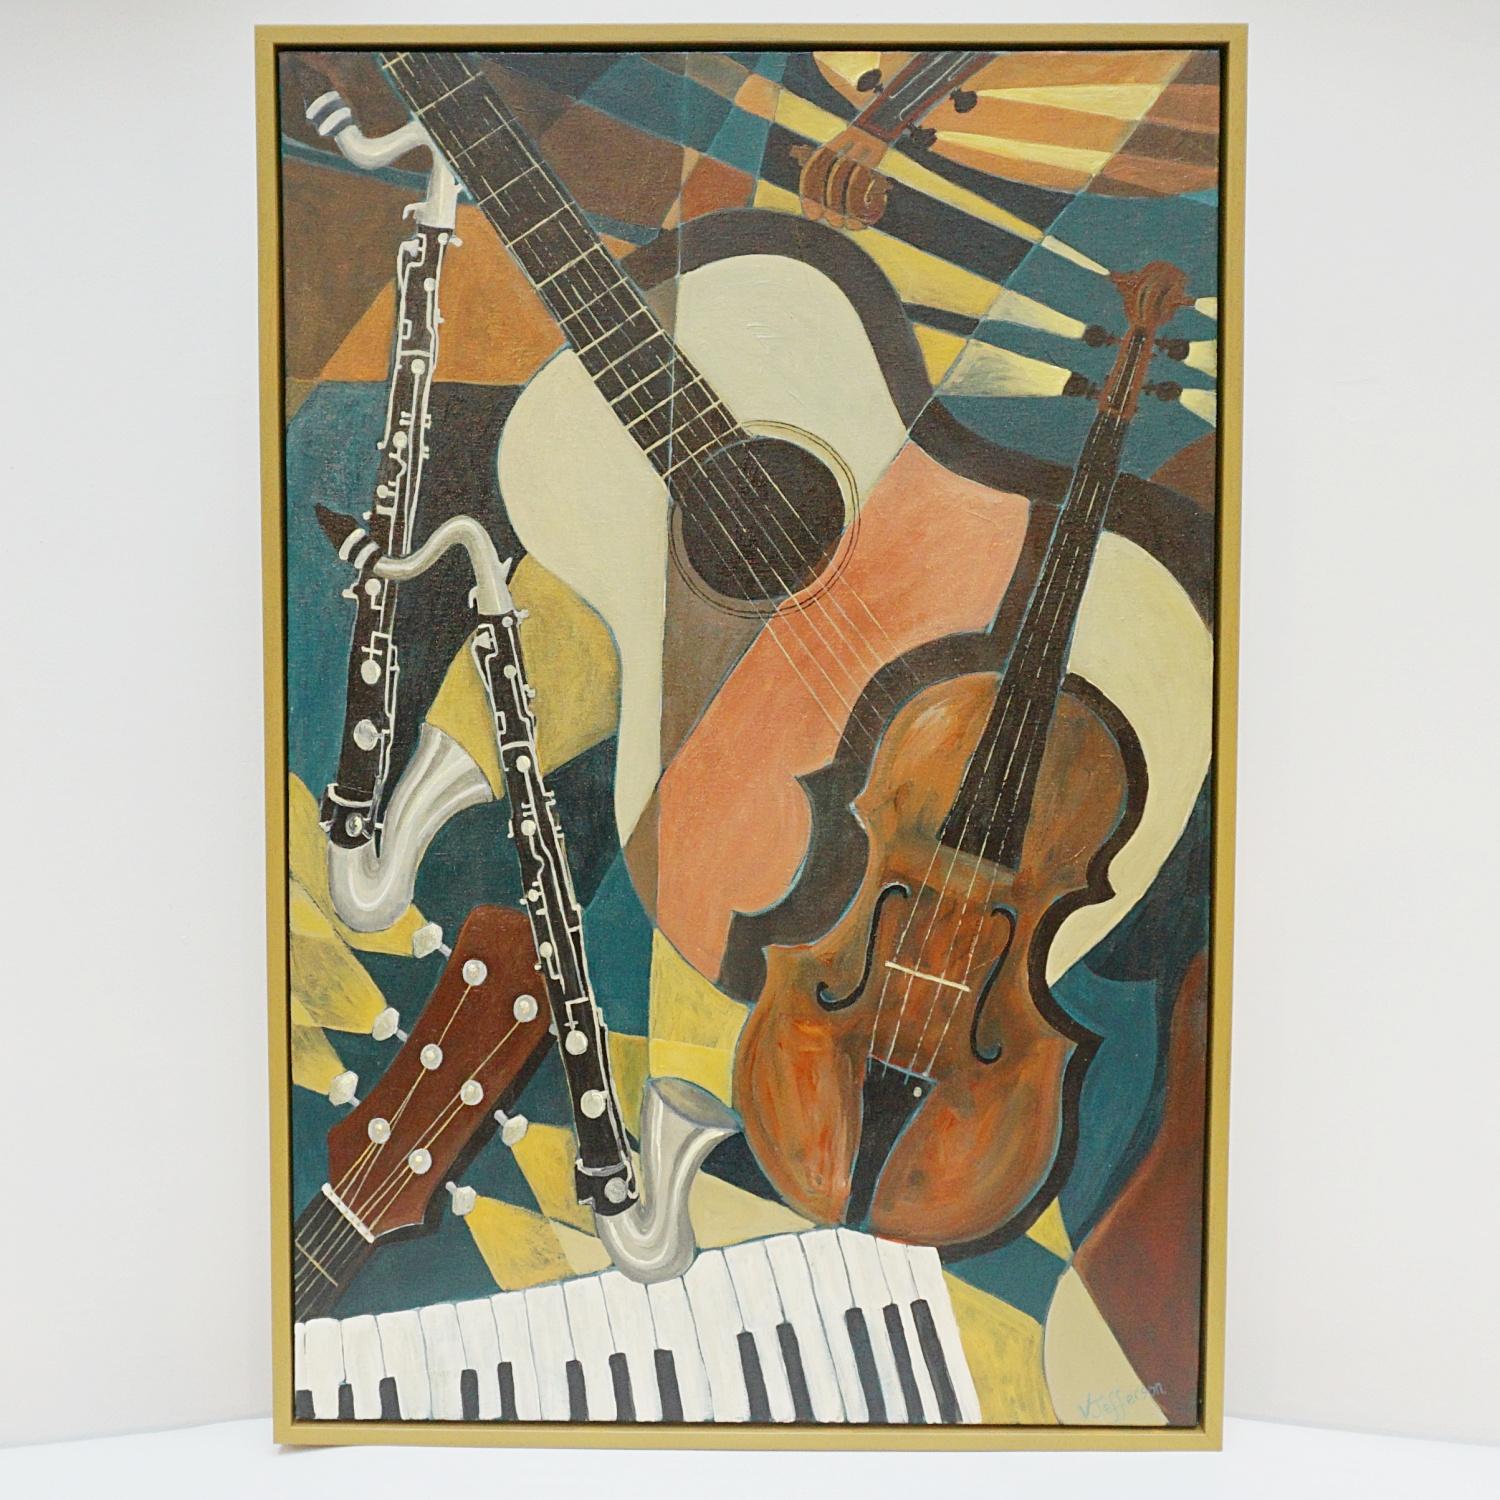 'Instrument' An Art Deco style contemporary painting by Vera Jefferson depicting various instruments amongst a stylised background. Signed V Jefferson to lower right. 

Vera Jefferson trained at Goldsmiths College, London and went on to teach Art